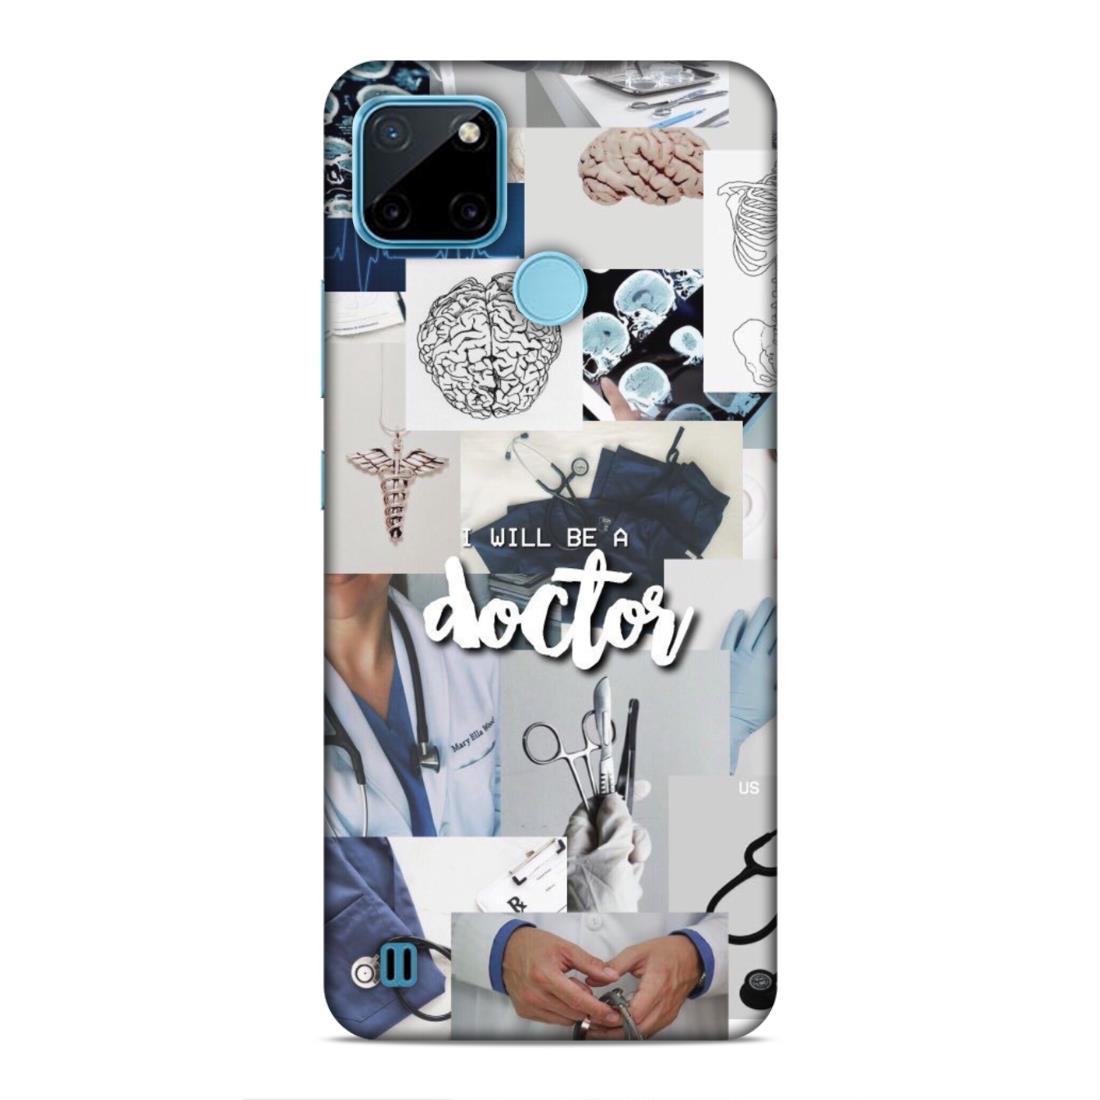 Will Be a Doctor Hard Back Case For Realme C21Y / C25Y